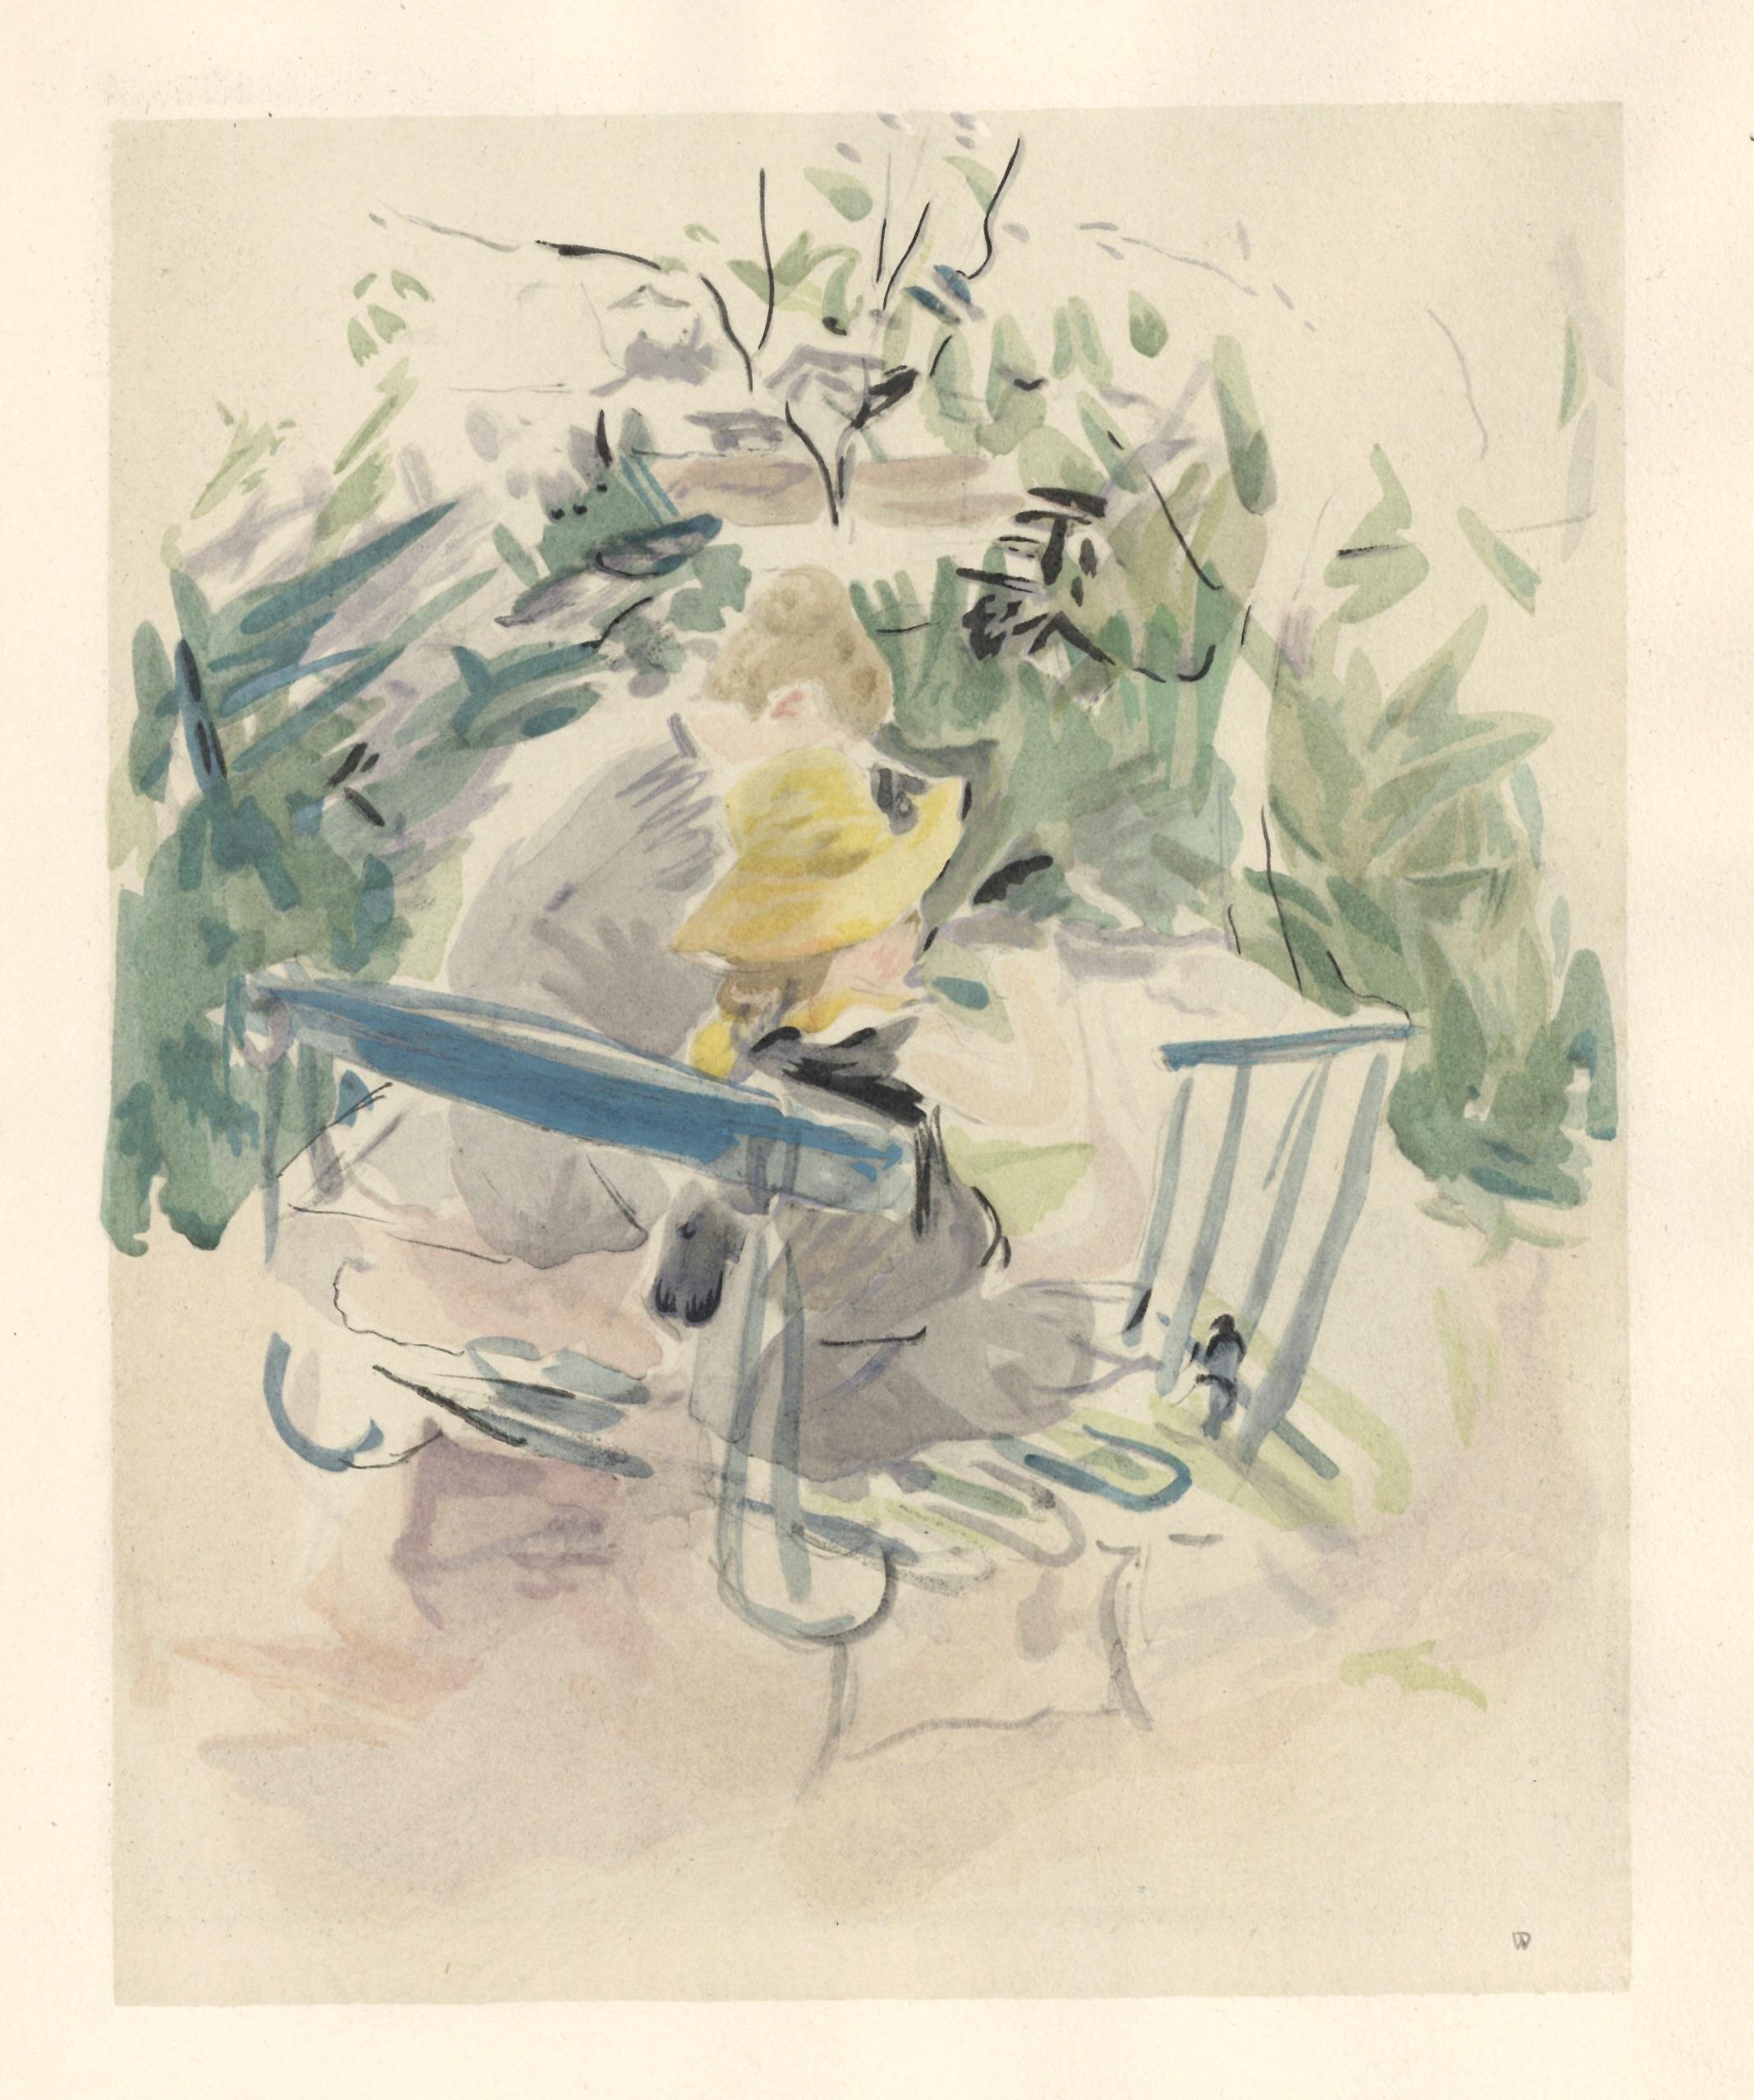 Medium: pochoir (after the 1883 watercolor). Printed 1946 in a limited edition of 300 for the rare "Berthe Morisot Seize Aquarelles" portfolio, published in Paris by Quatre Chemins. The image measures 9 1/2 x 7 3/4 inches (245 x 195 mm). The total